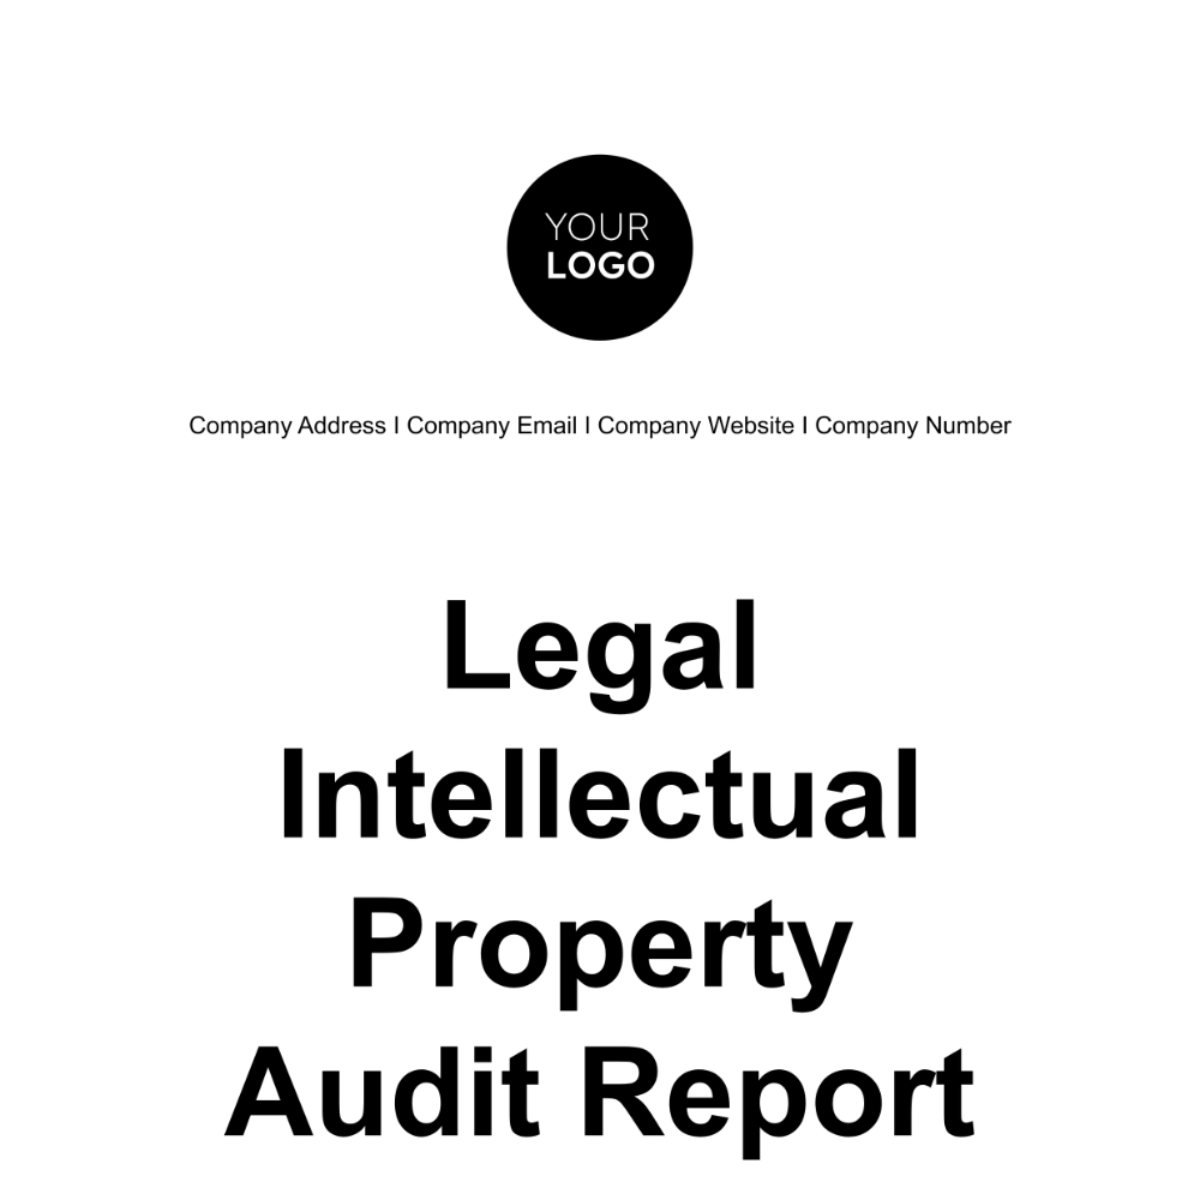 Free Legal Intellectual Property Audit Report Template